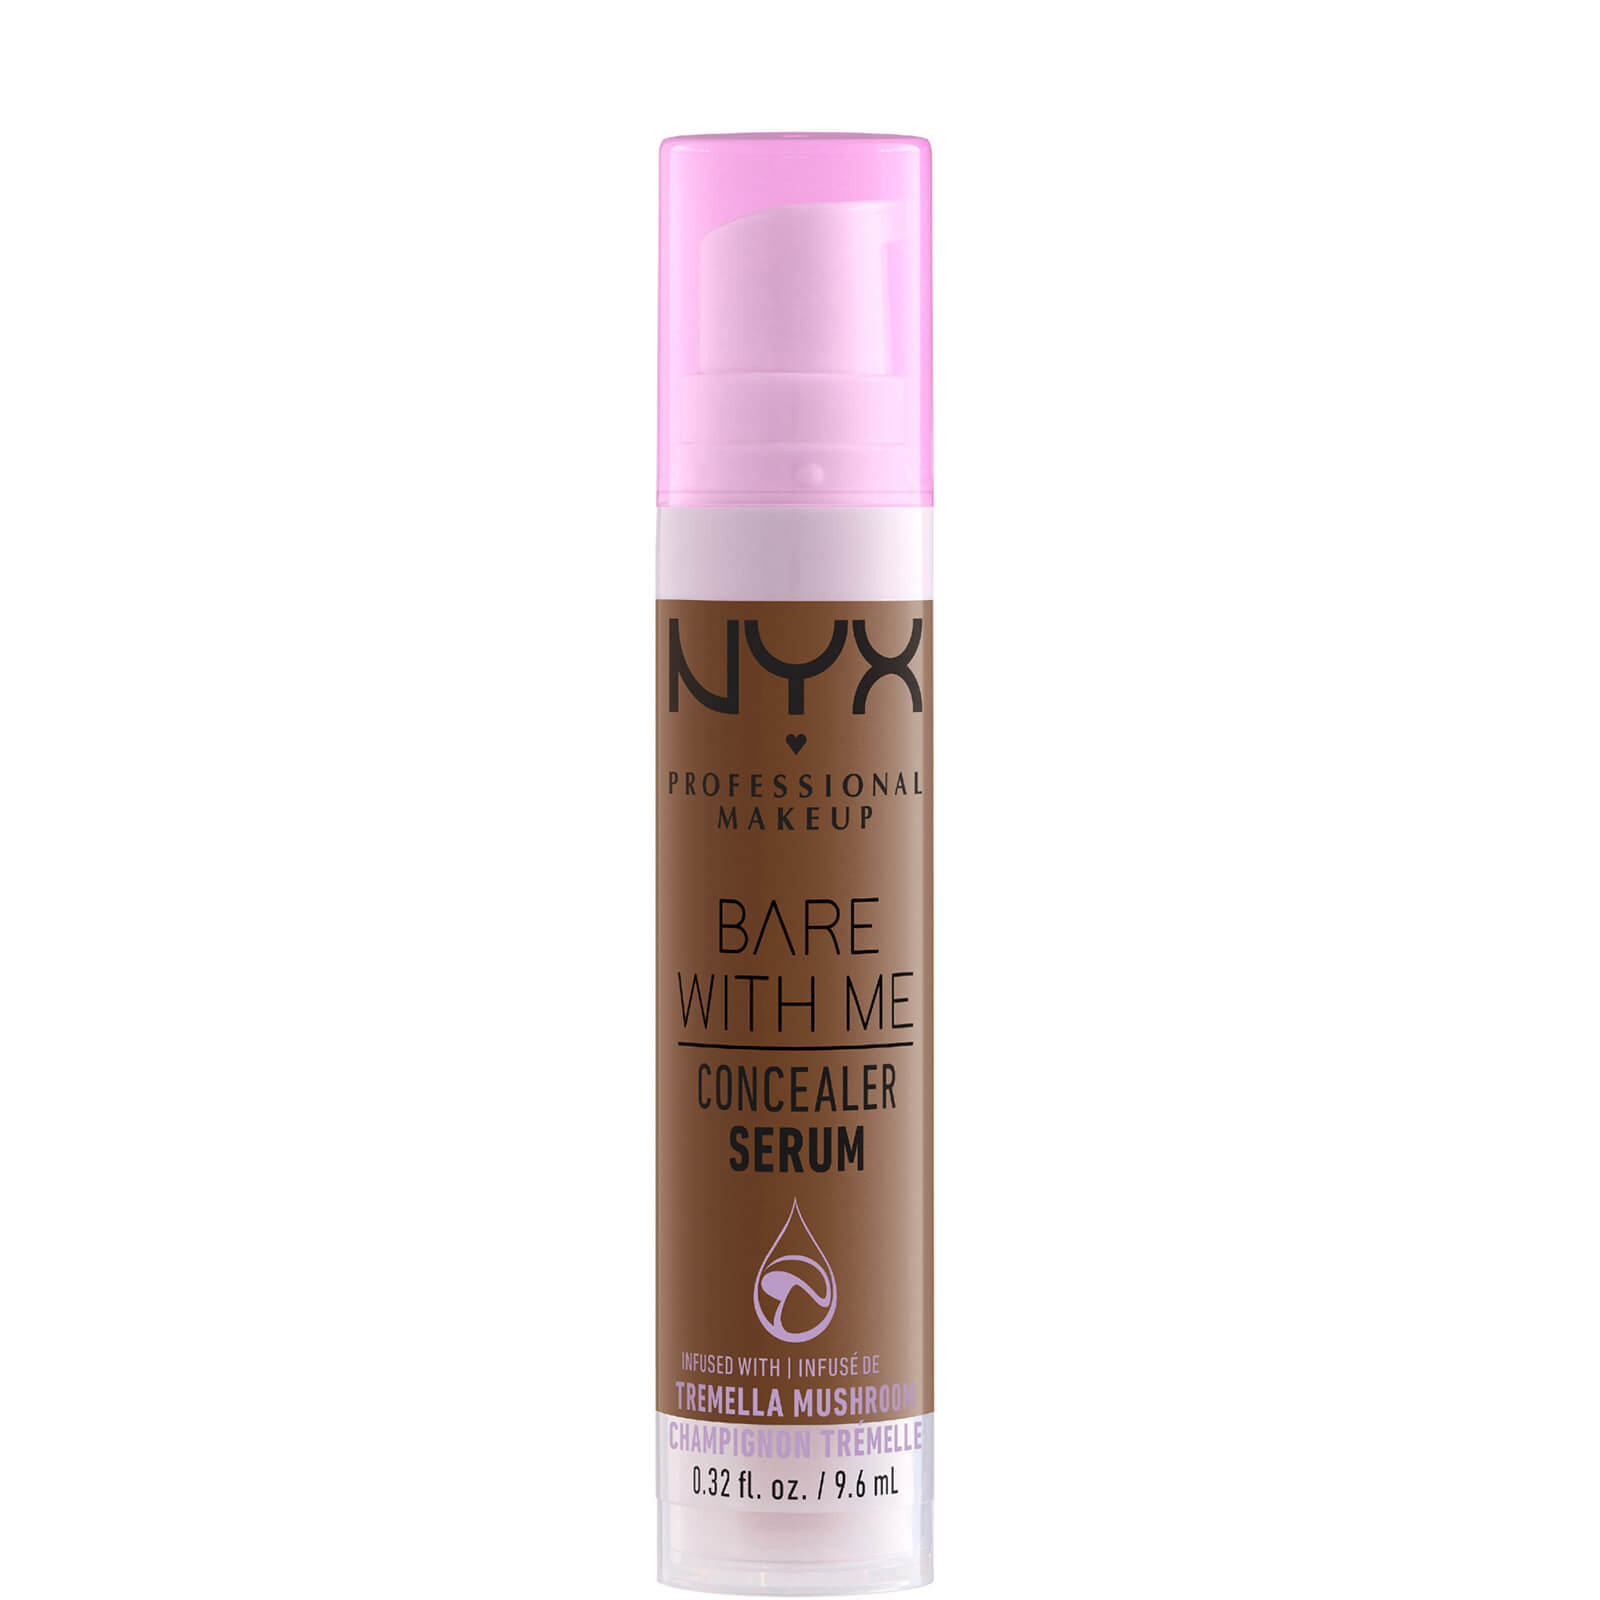 Image of NYX Professional Makeup Bare With Me Concealer Serum 9.6ml (Various Shades) - Mocha